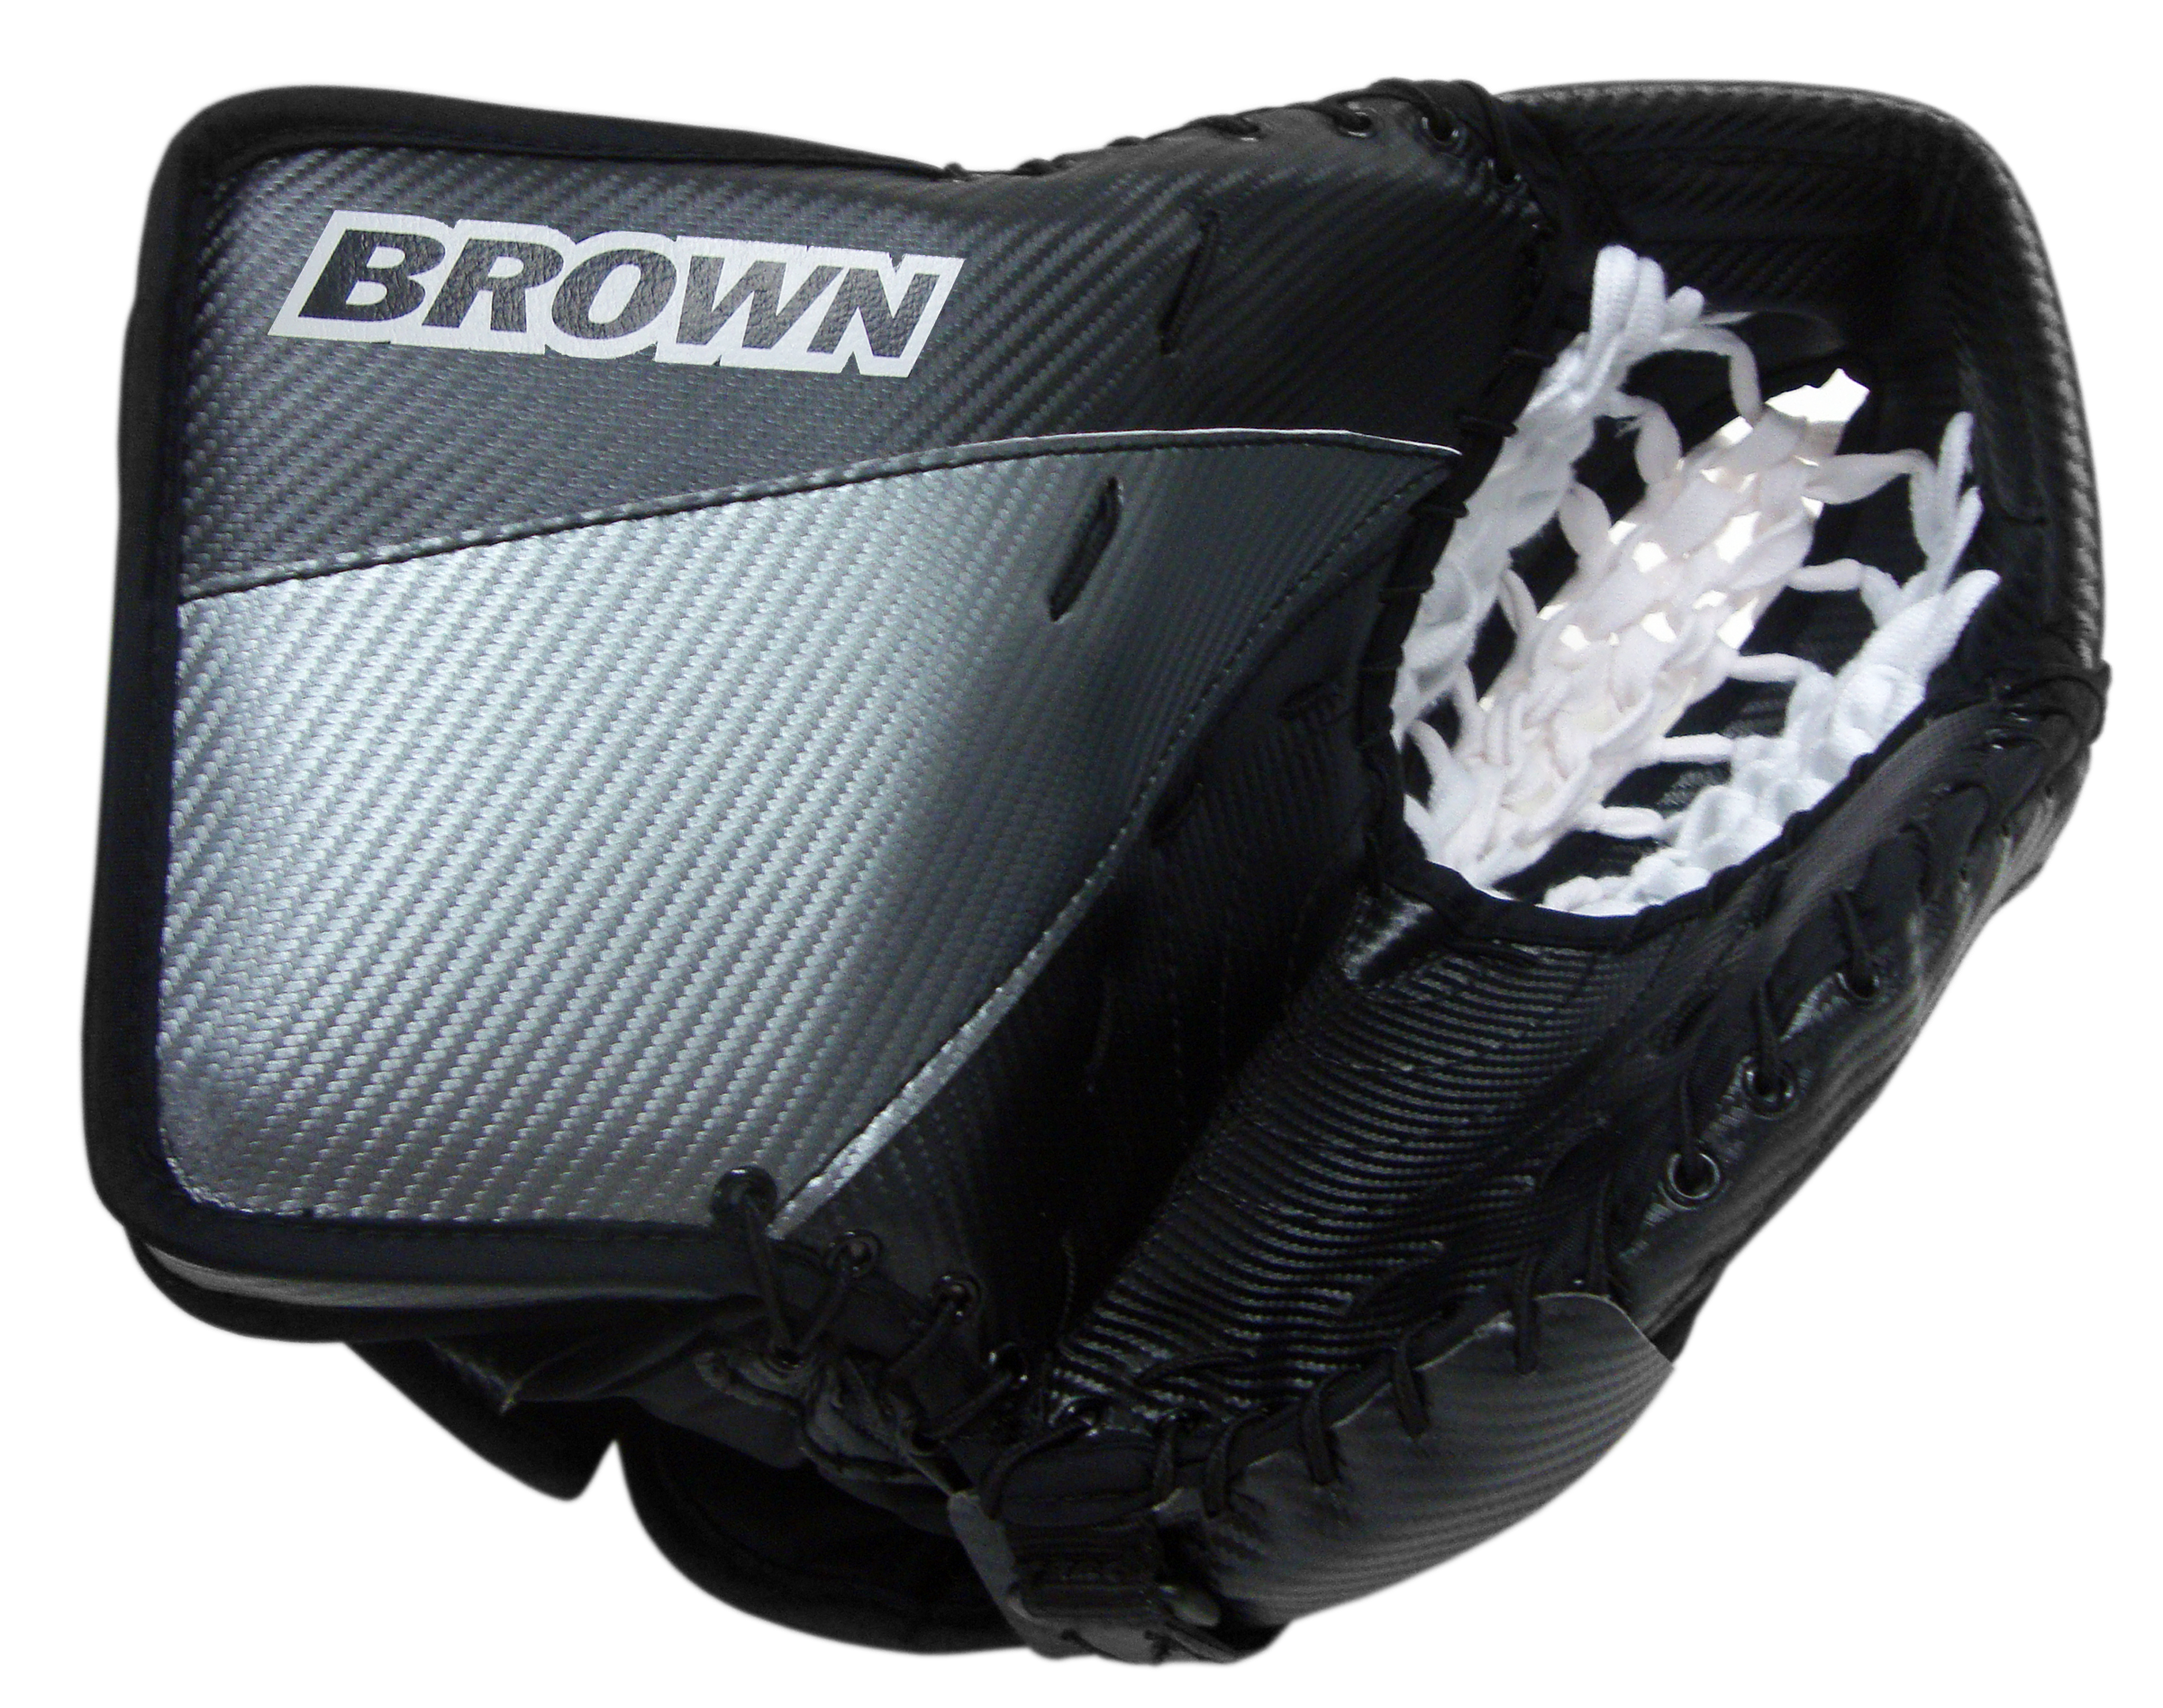 2500 catch glove in black and stainless steel